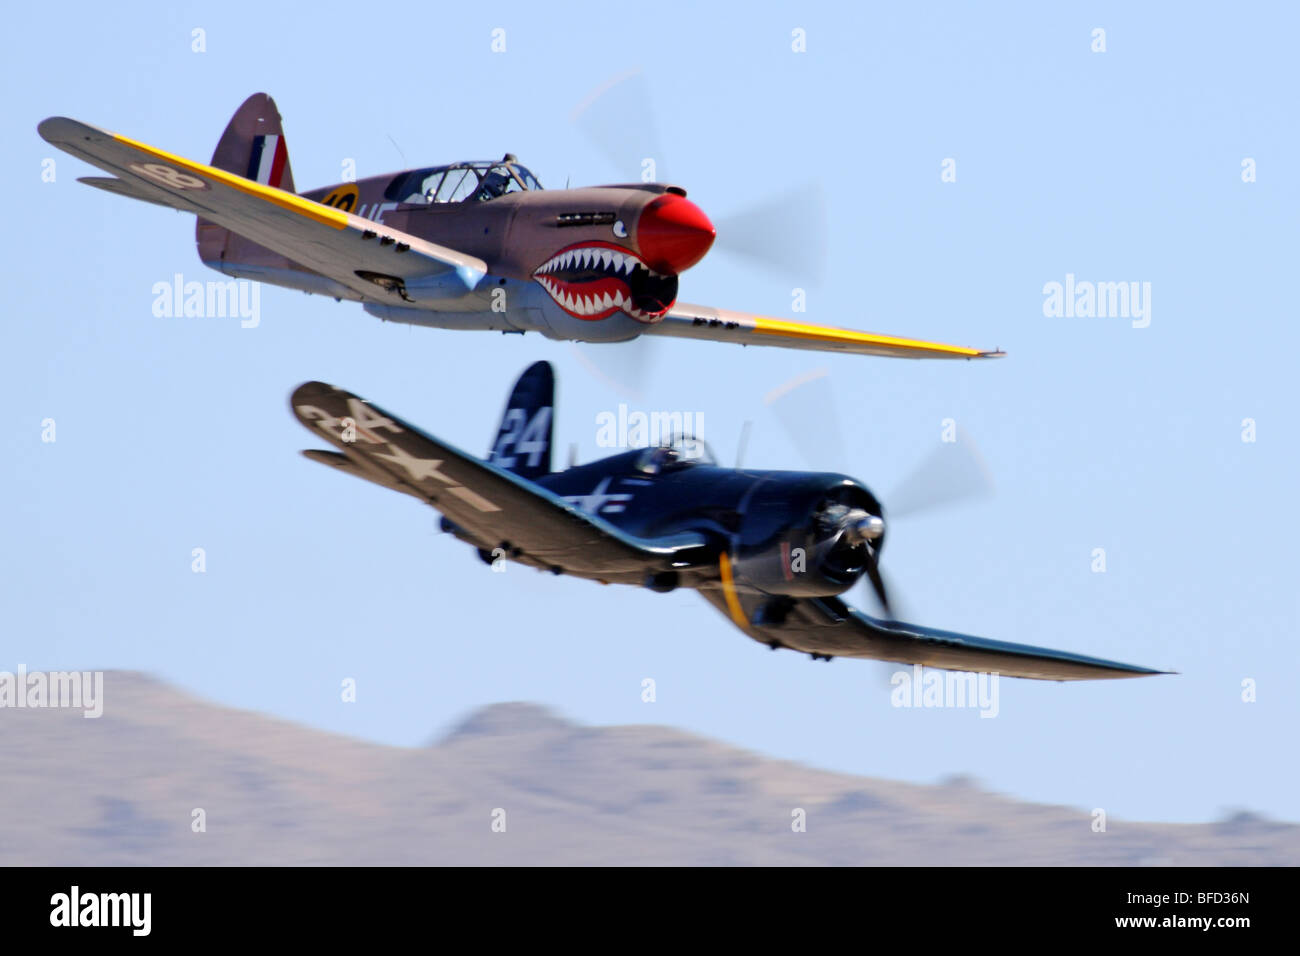 P-40 Warhawk and F4U Corsair battle in air racing action. Stock Photo